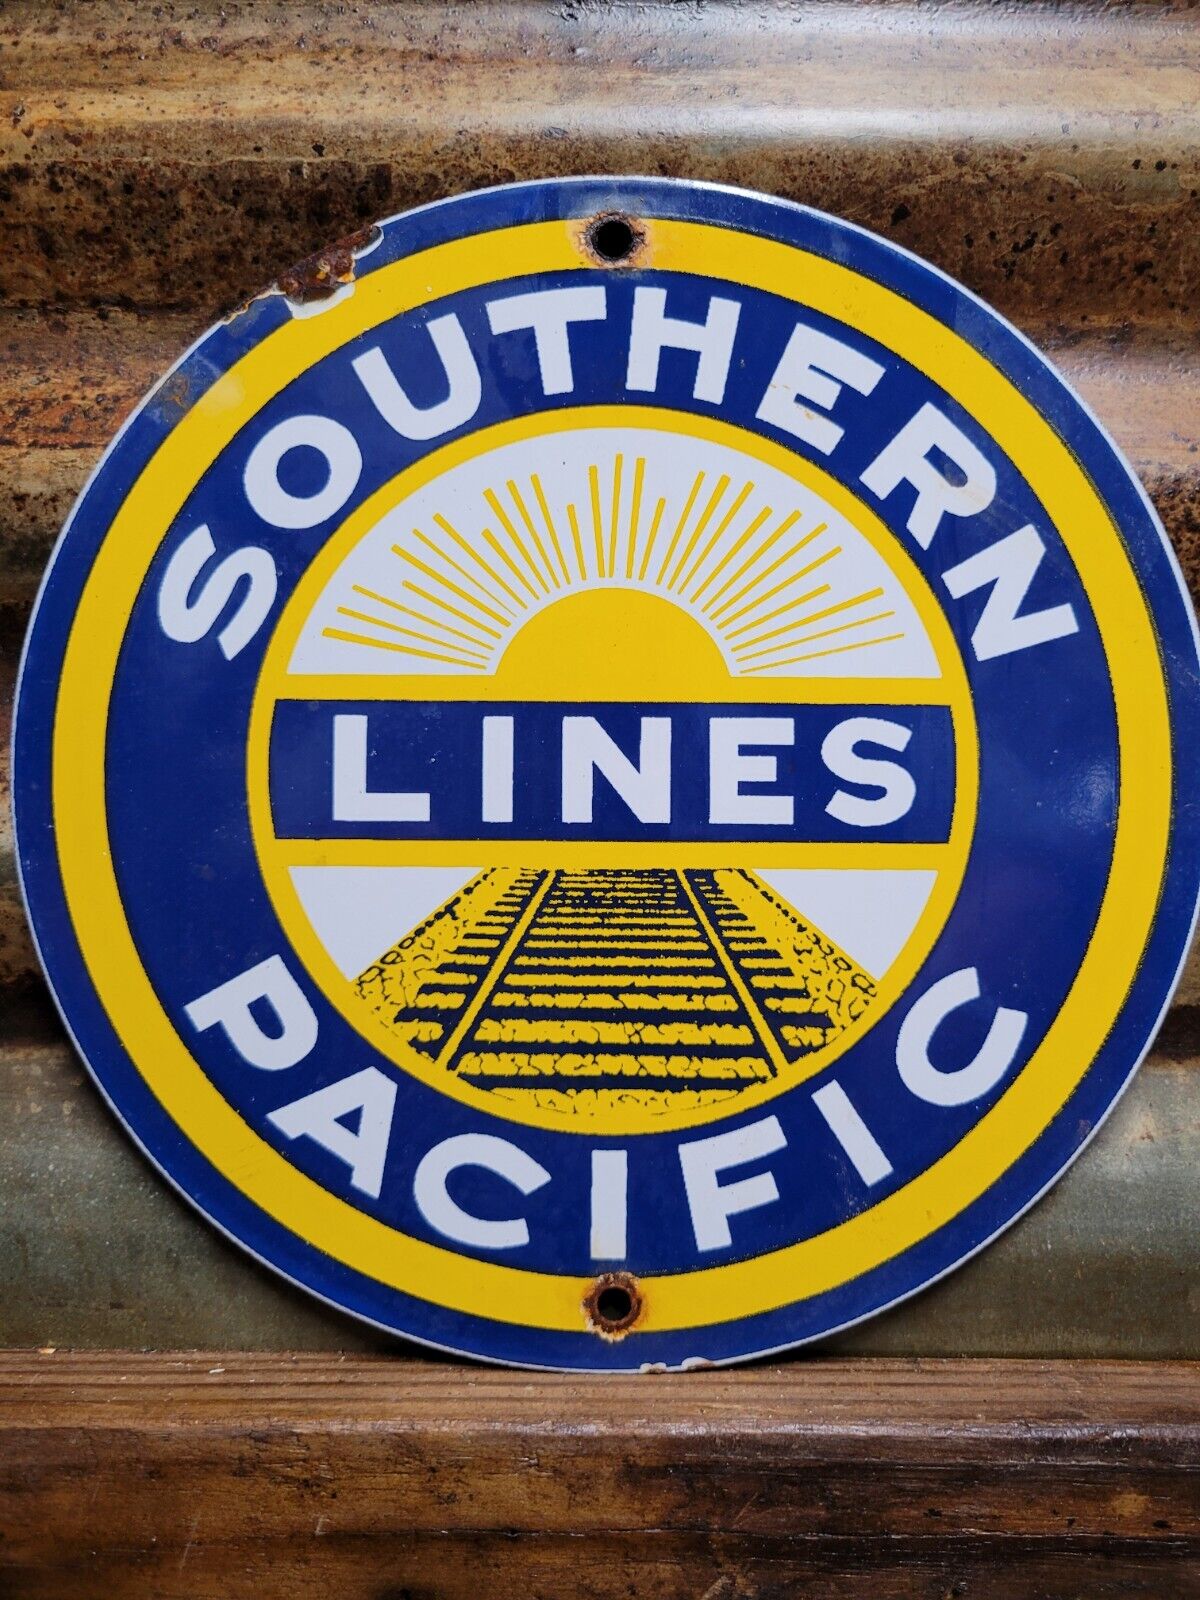 VINTAGE SOUTHERN PACIFIC LINE PORCELAIN SIGN RAILROAD TRAIN STATION RAILWAY SIGN